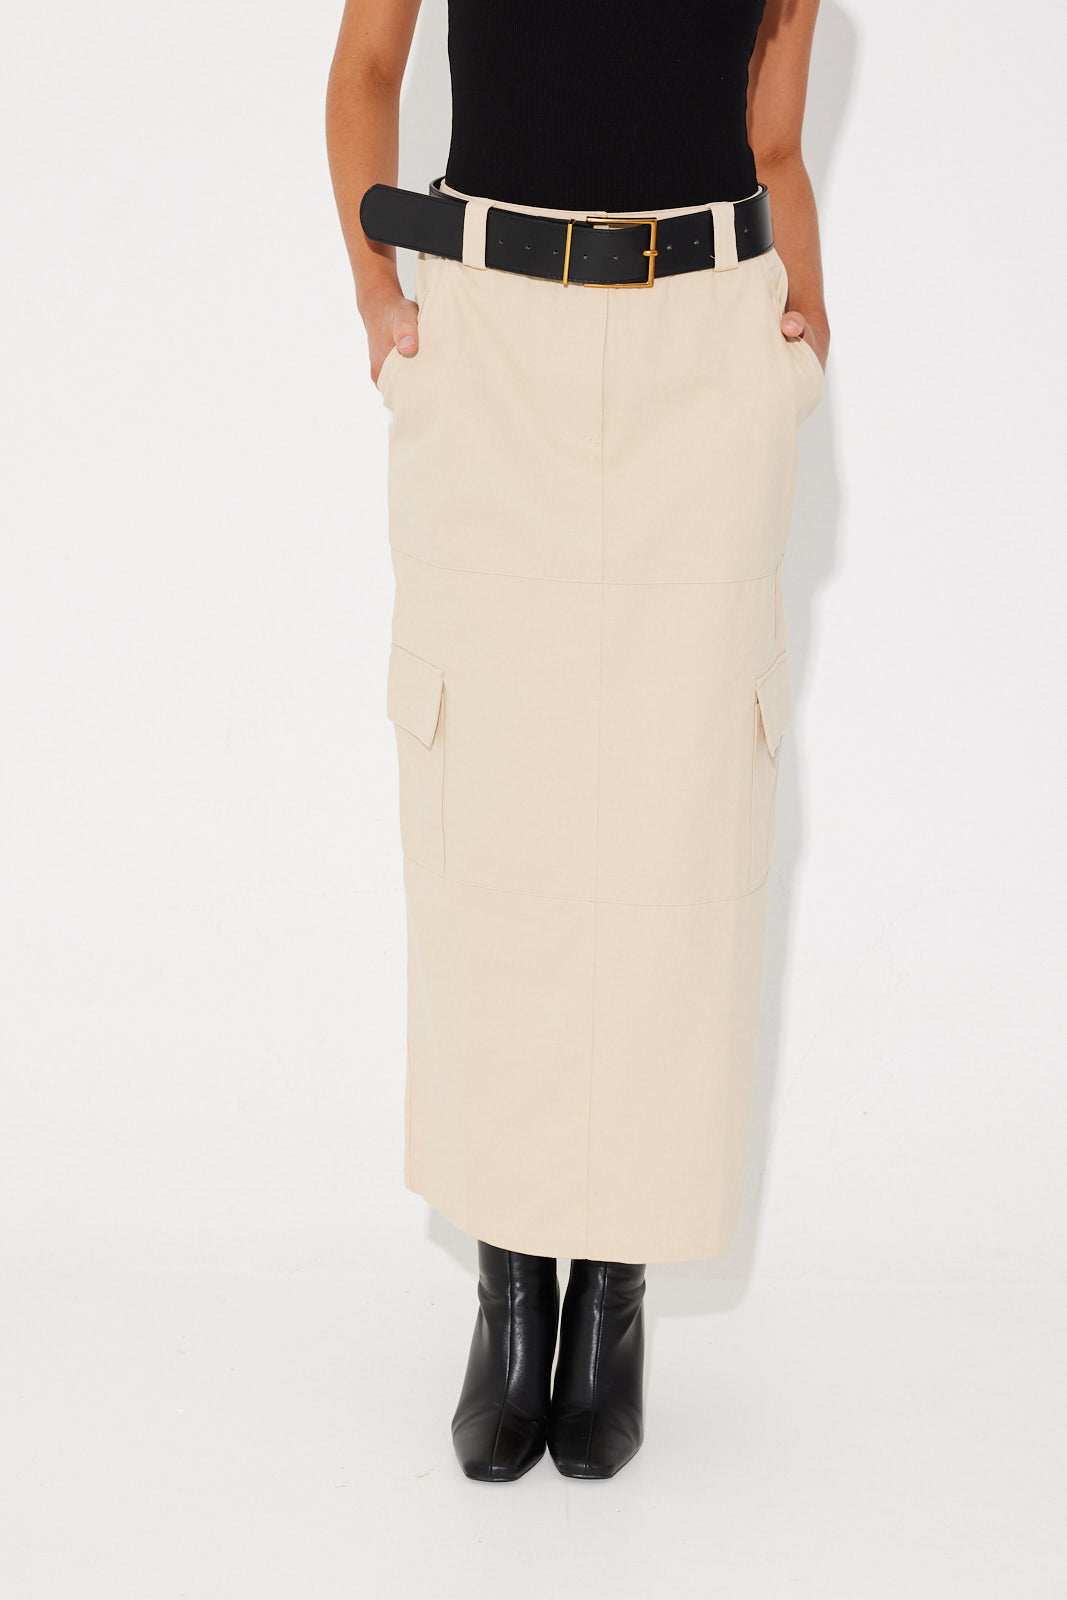 Skirts Online | Effortless and Chic Clothing | Crescent